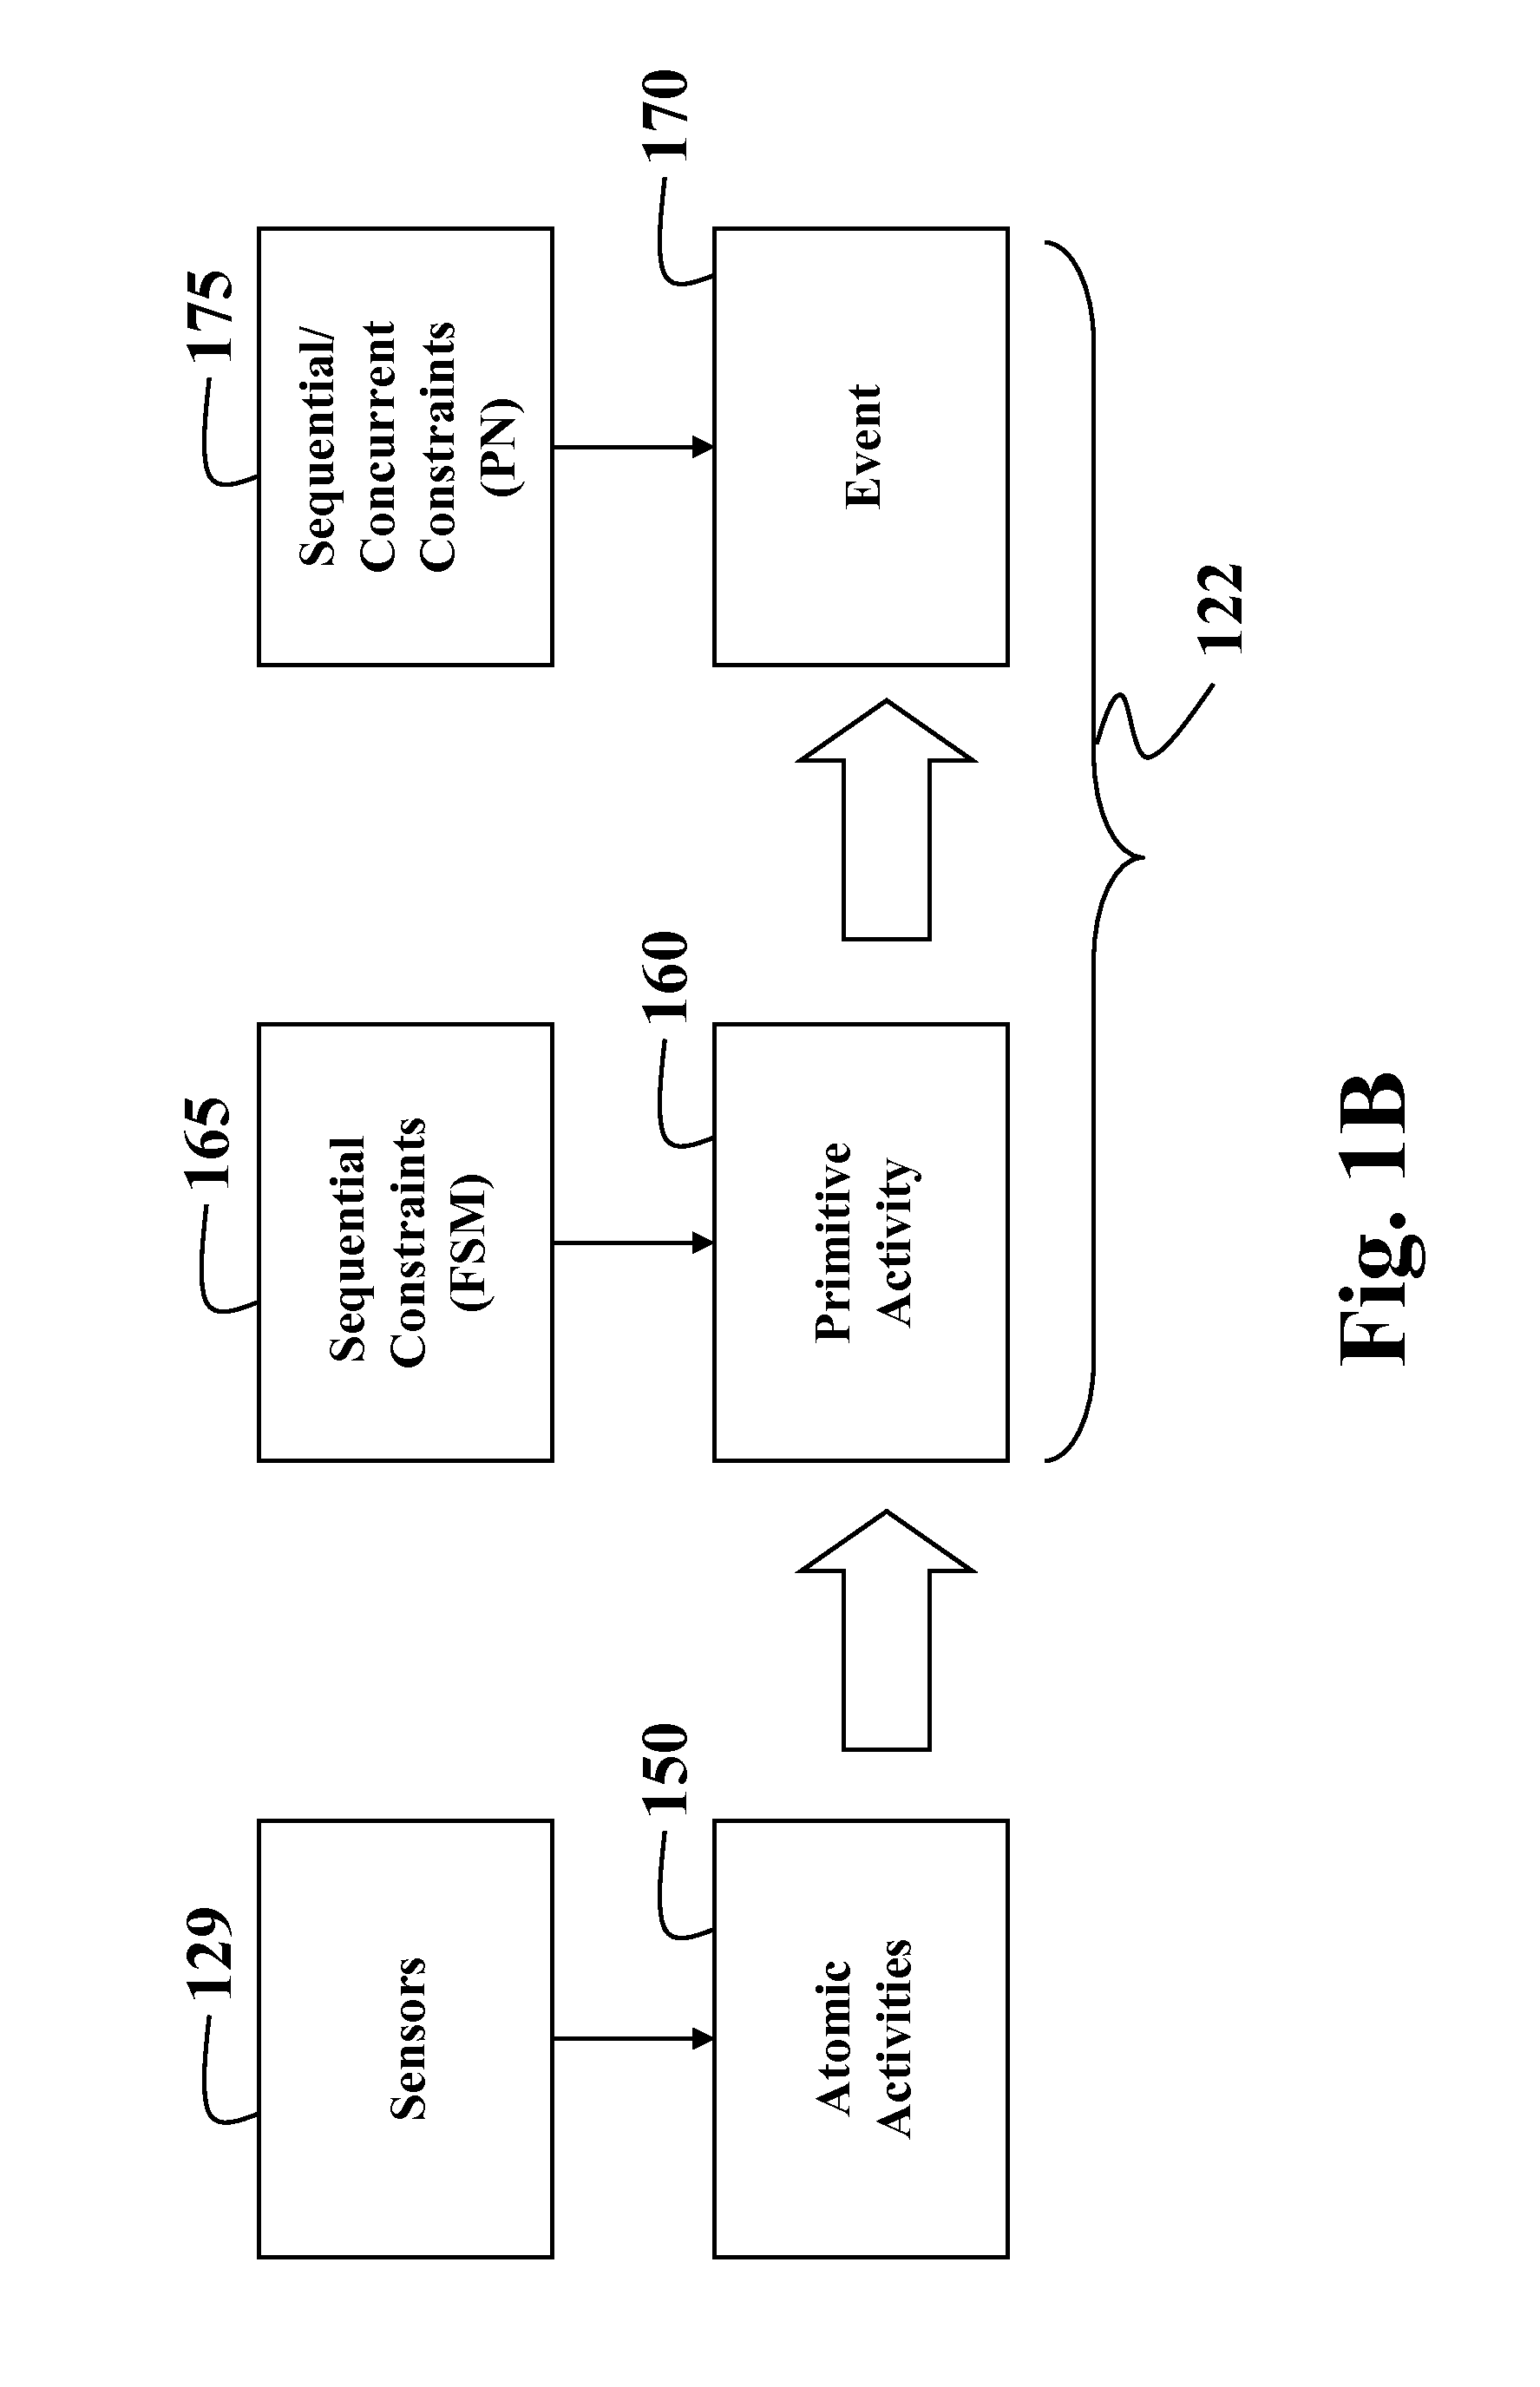 Method and System for Detecting Events in Environments